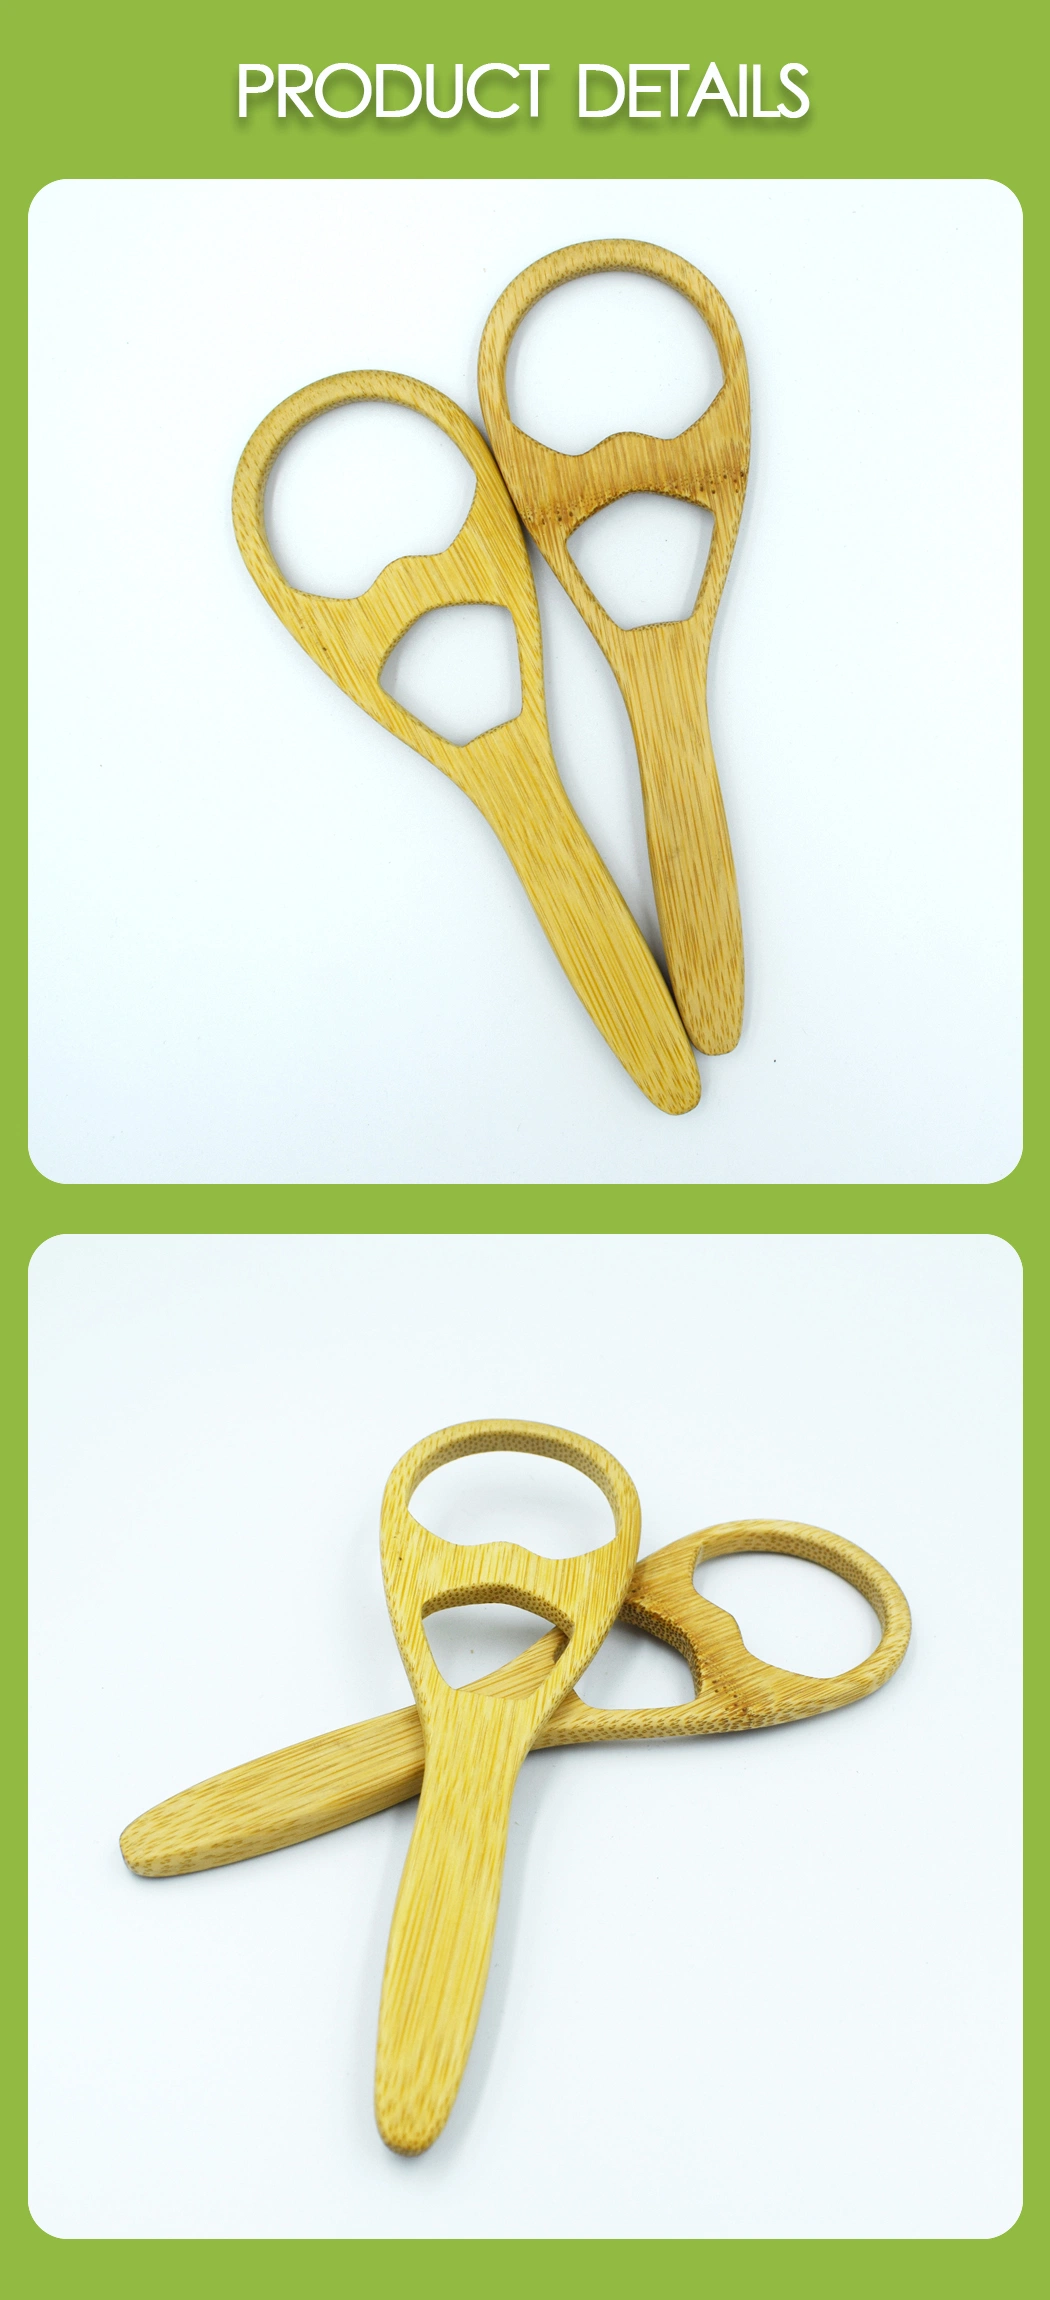 OEM 100% Completely Biodegradable Bamboo Tongue Cleaner Scraper